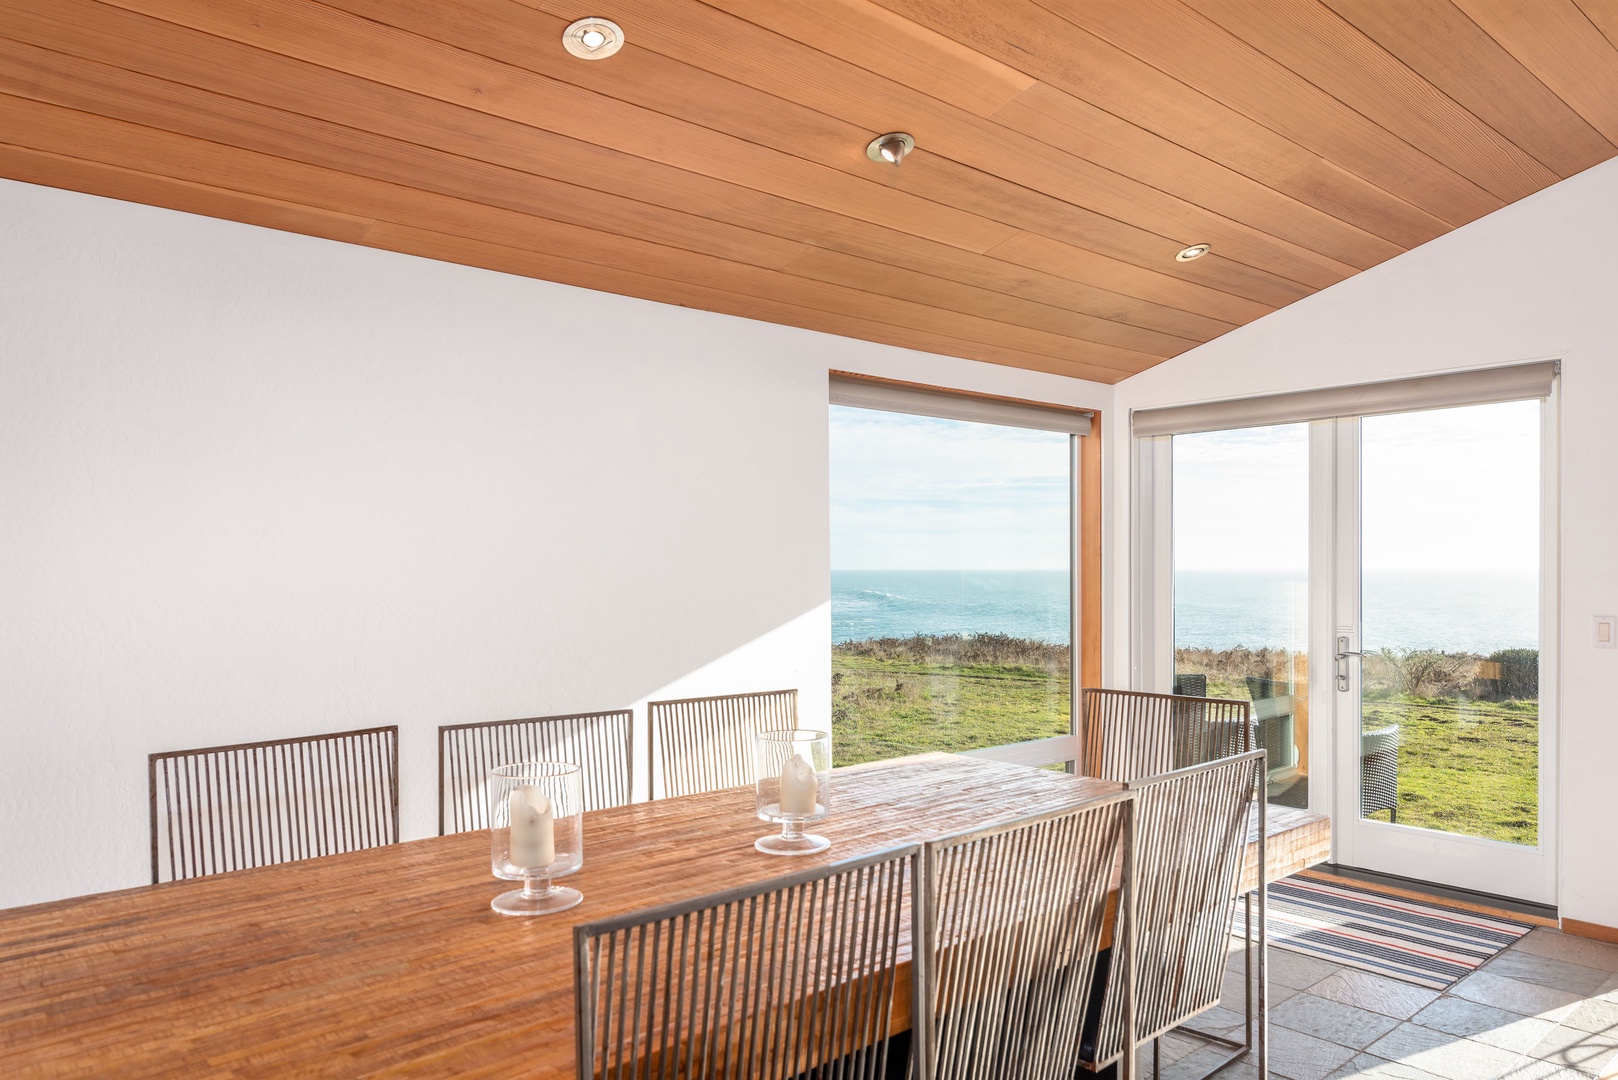 Dining table for 8 with blue ocean views